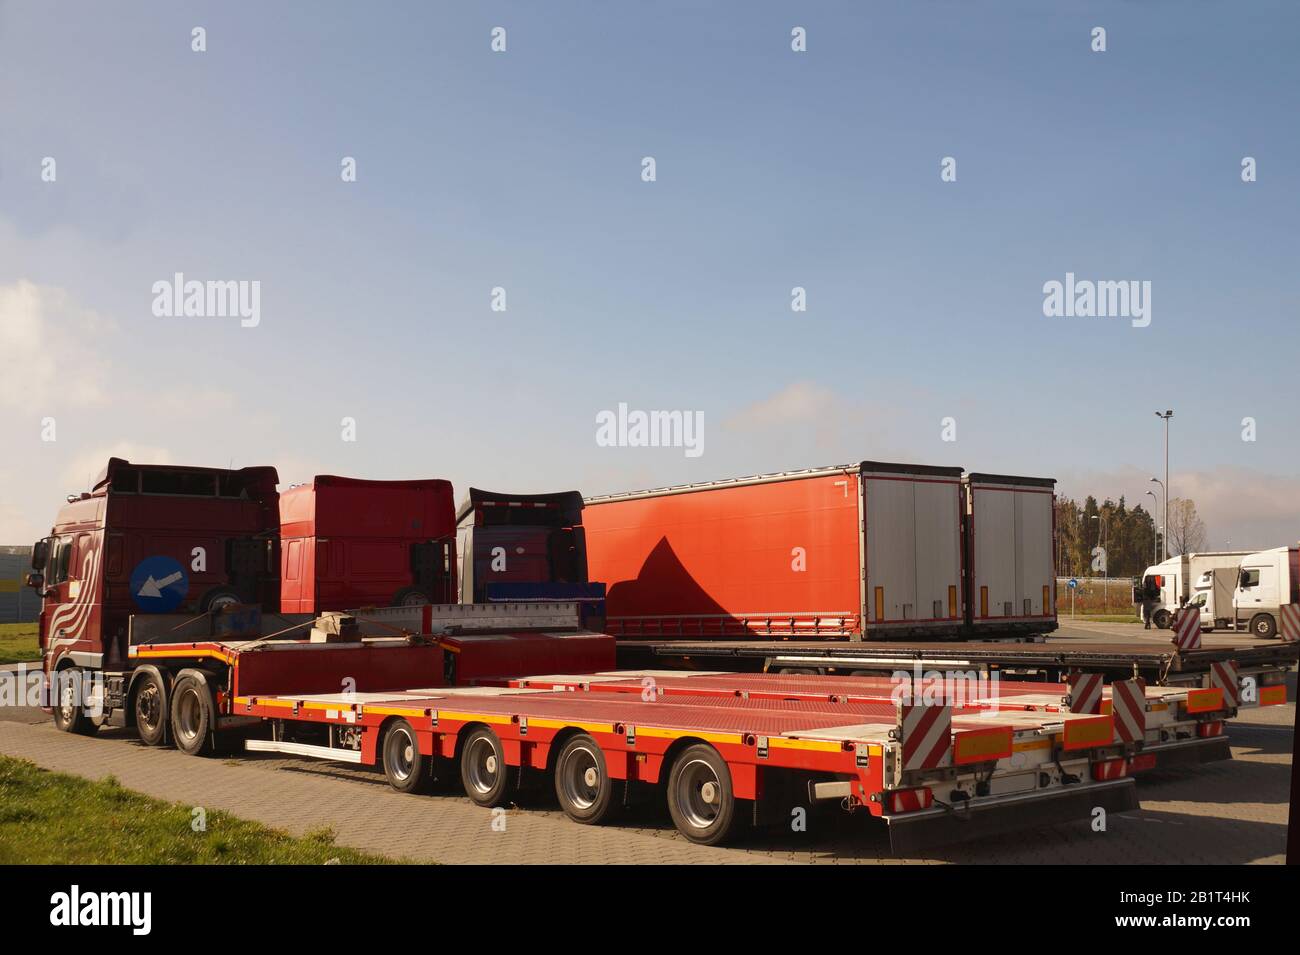 Trucks. A parking lot filled with various trucks. Stock Photo